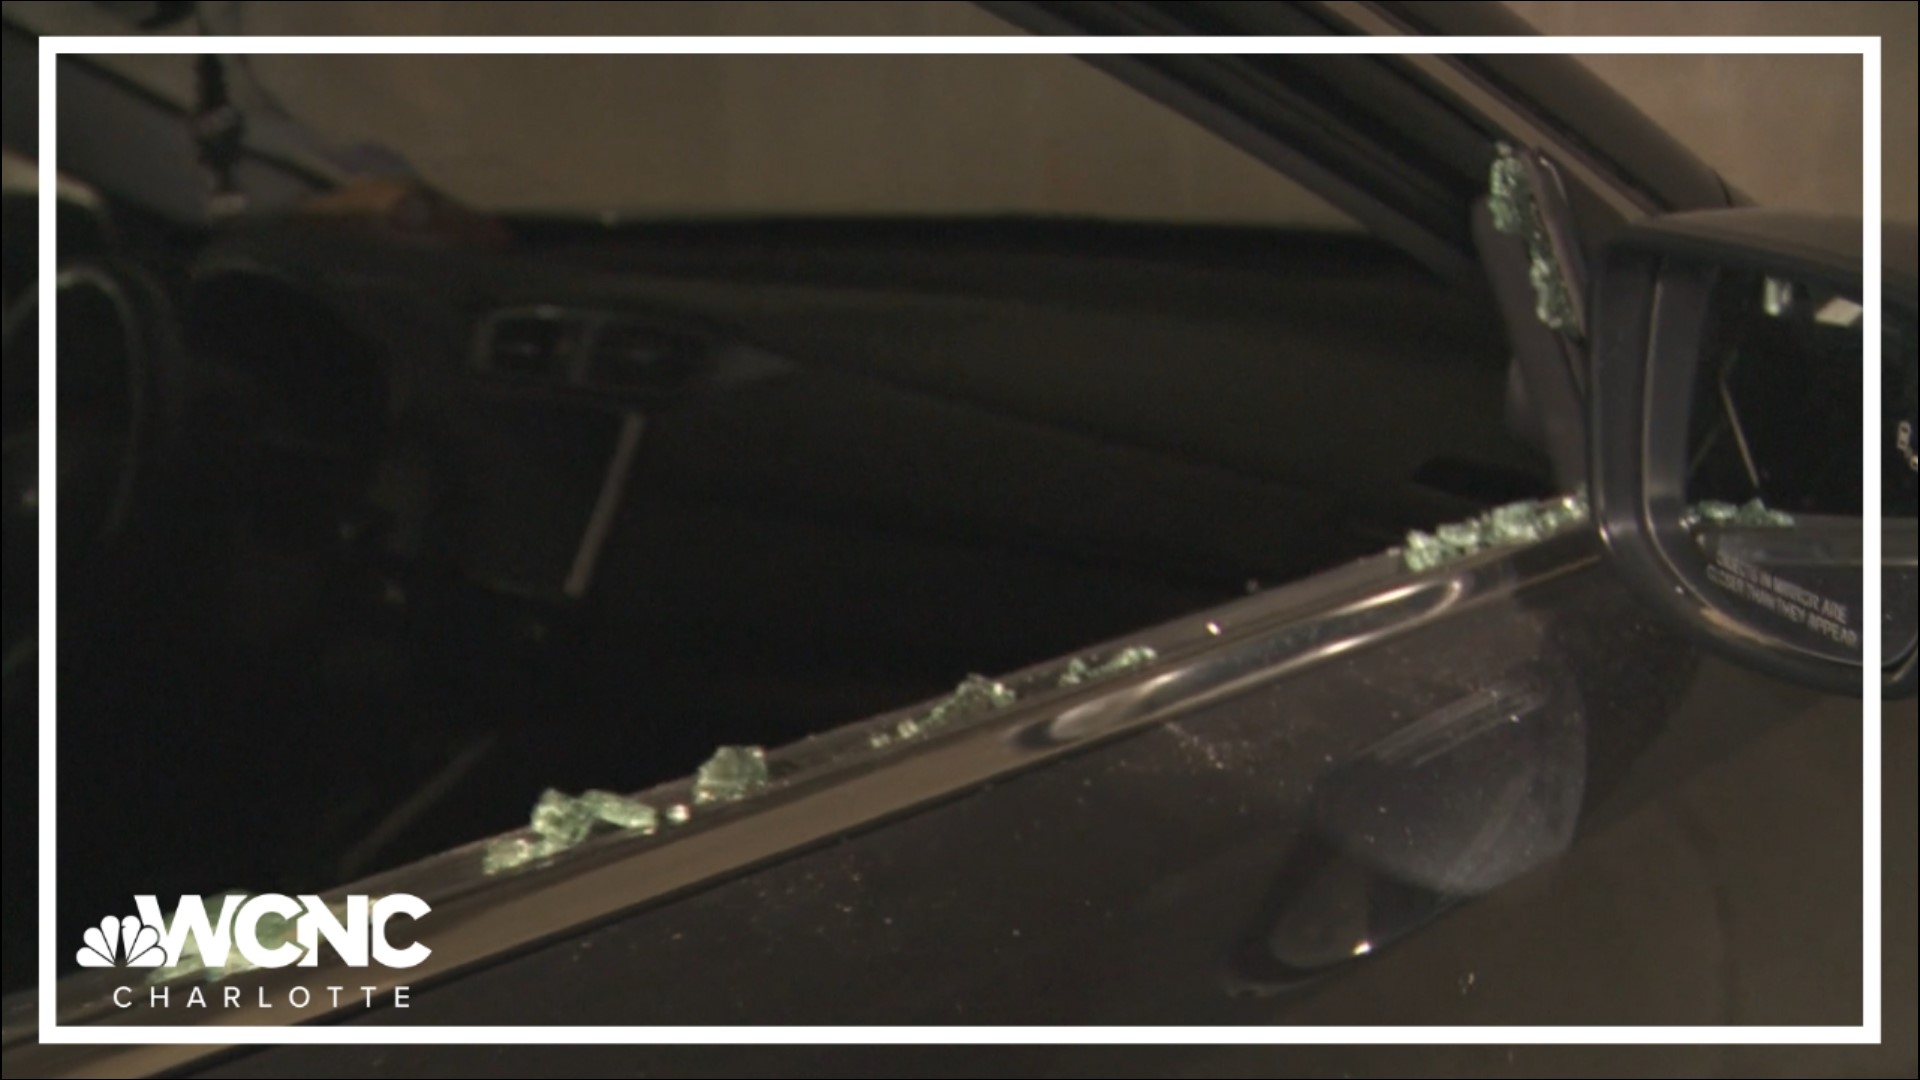 People living in Charlotte's South End neighborhood are concerned about their safety, after more than 20 cars were broken into or stolen at a complex.